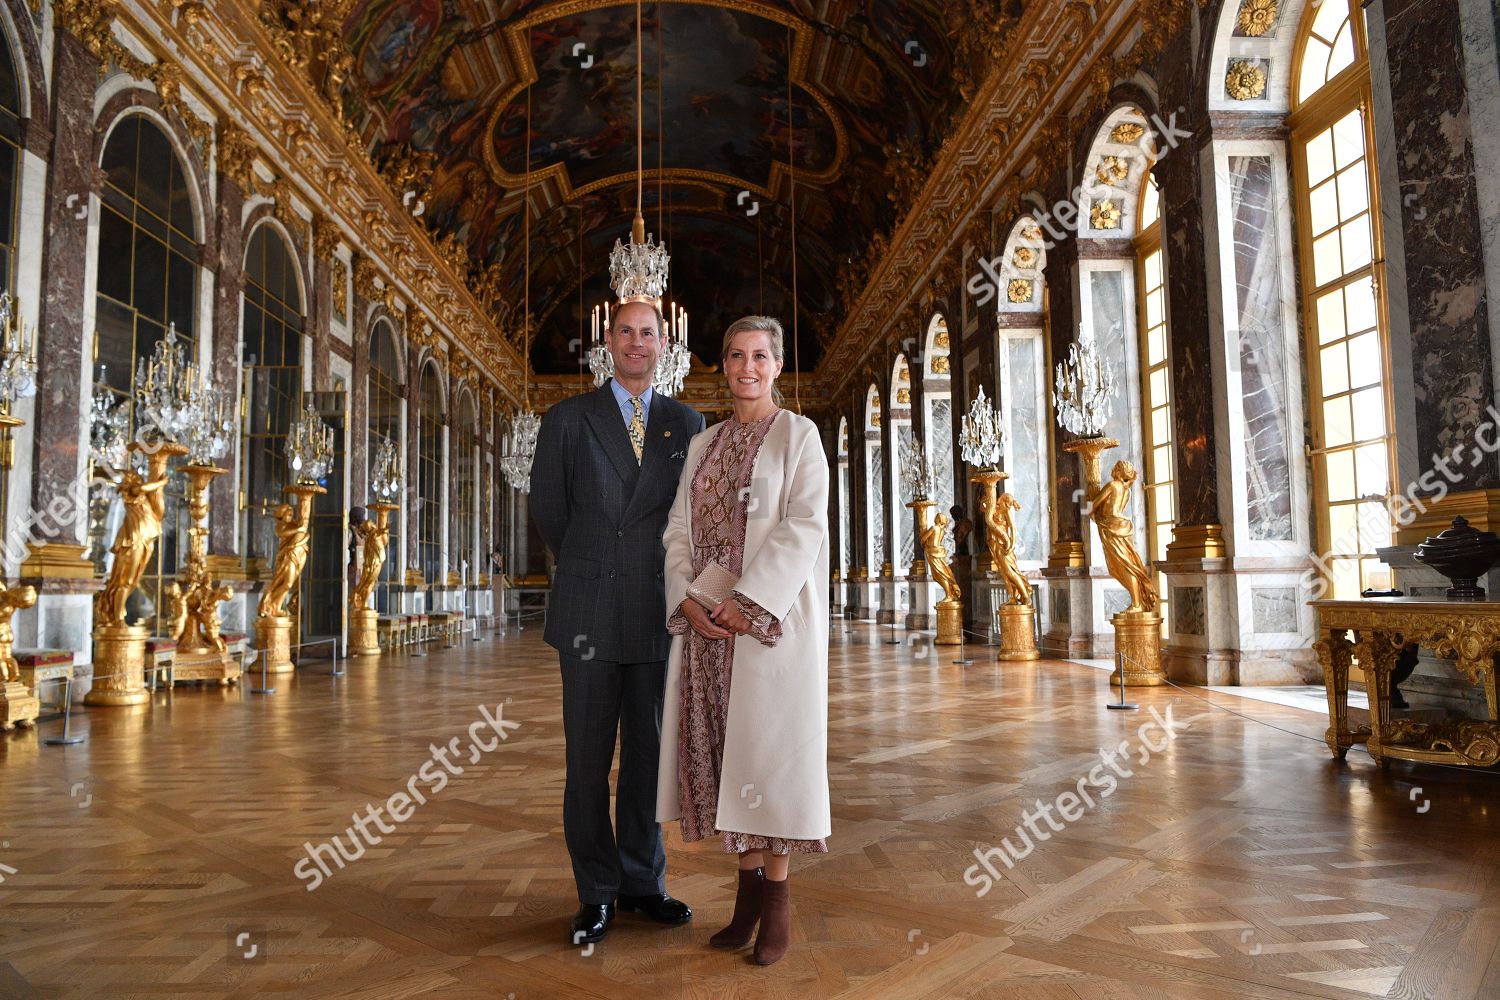 prince-edward-and-sophie-countess-of-wessex-visit-to-paris-france-shutterstock-editorial-9907868ac.jpg